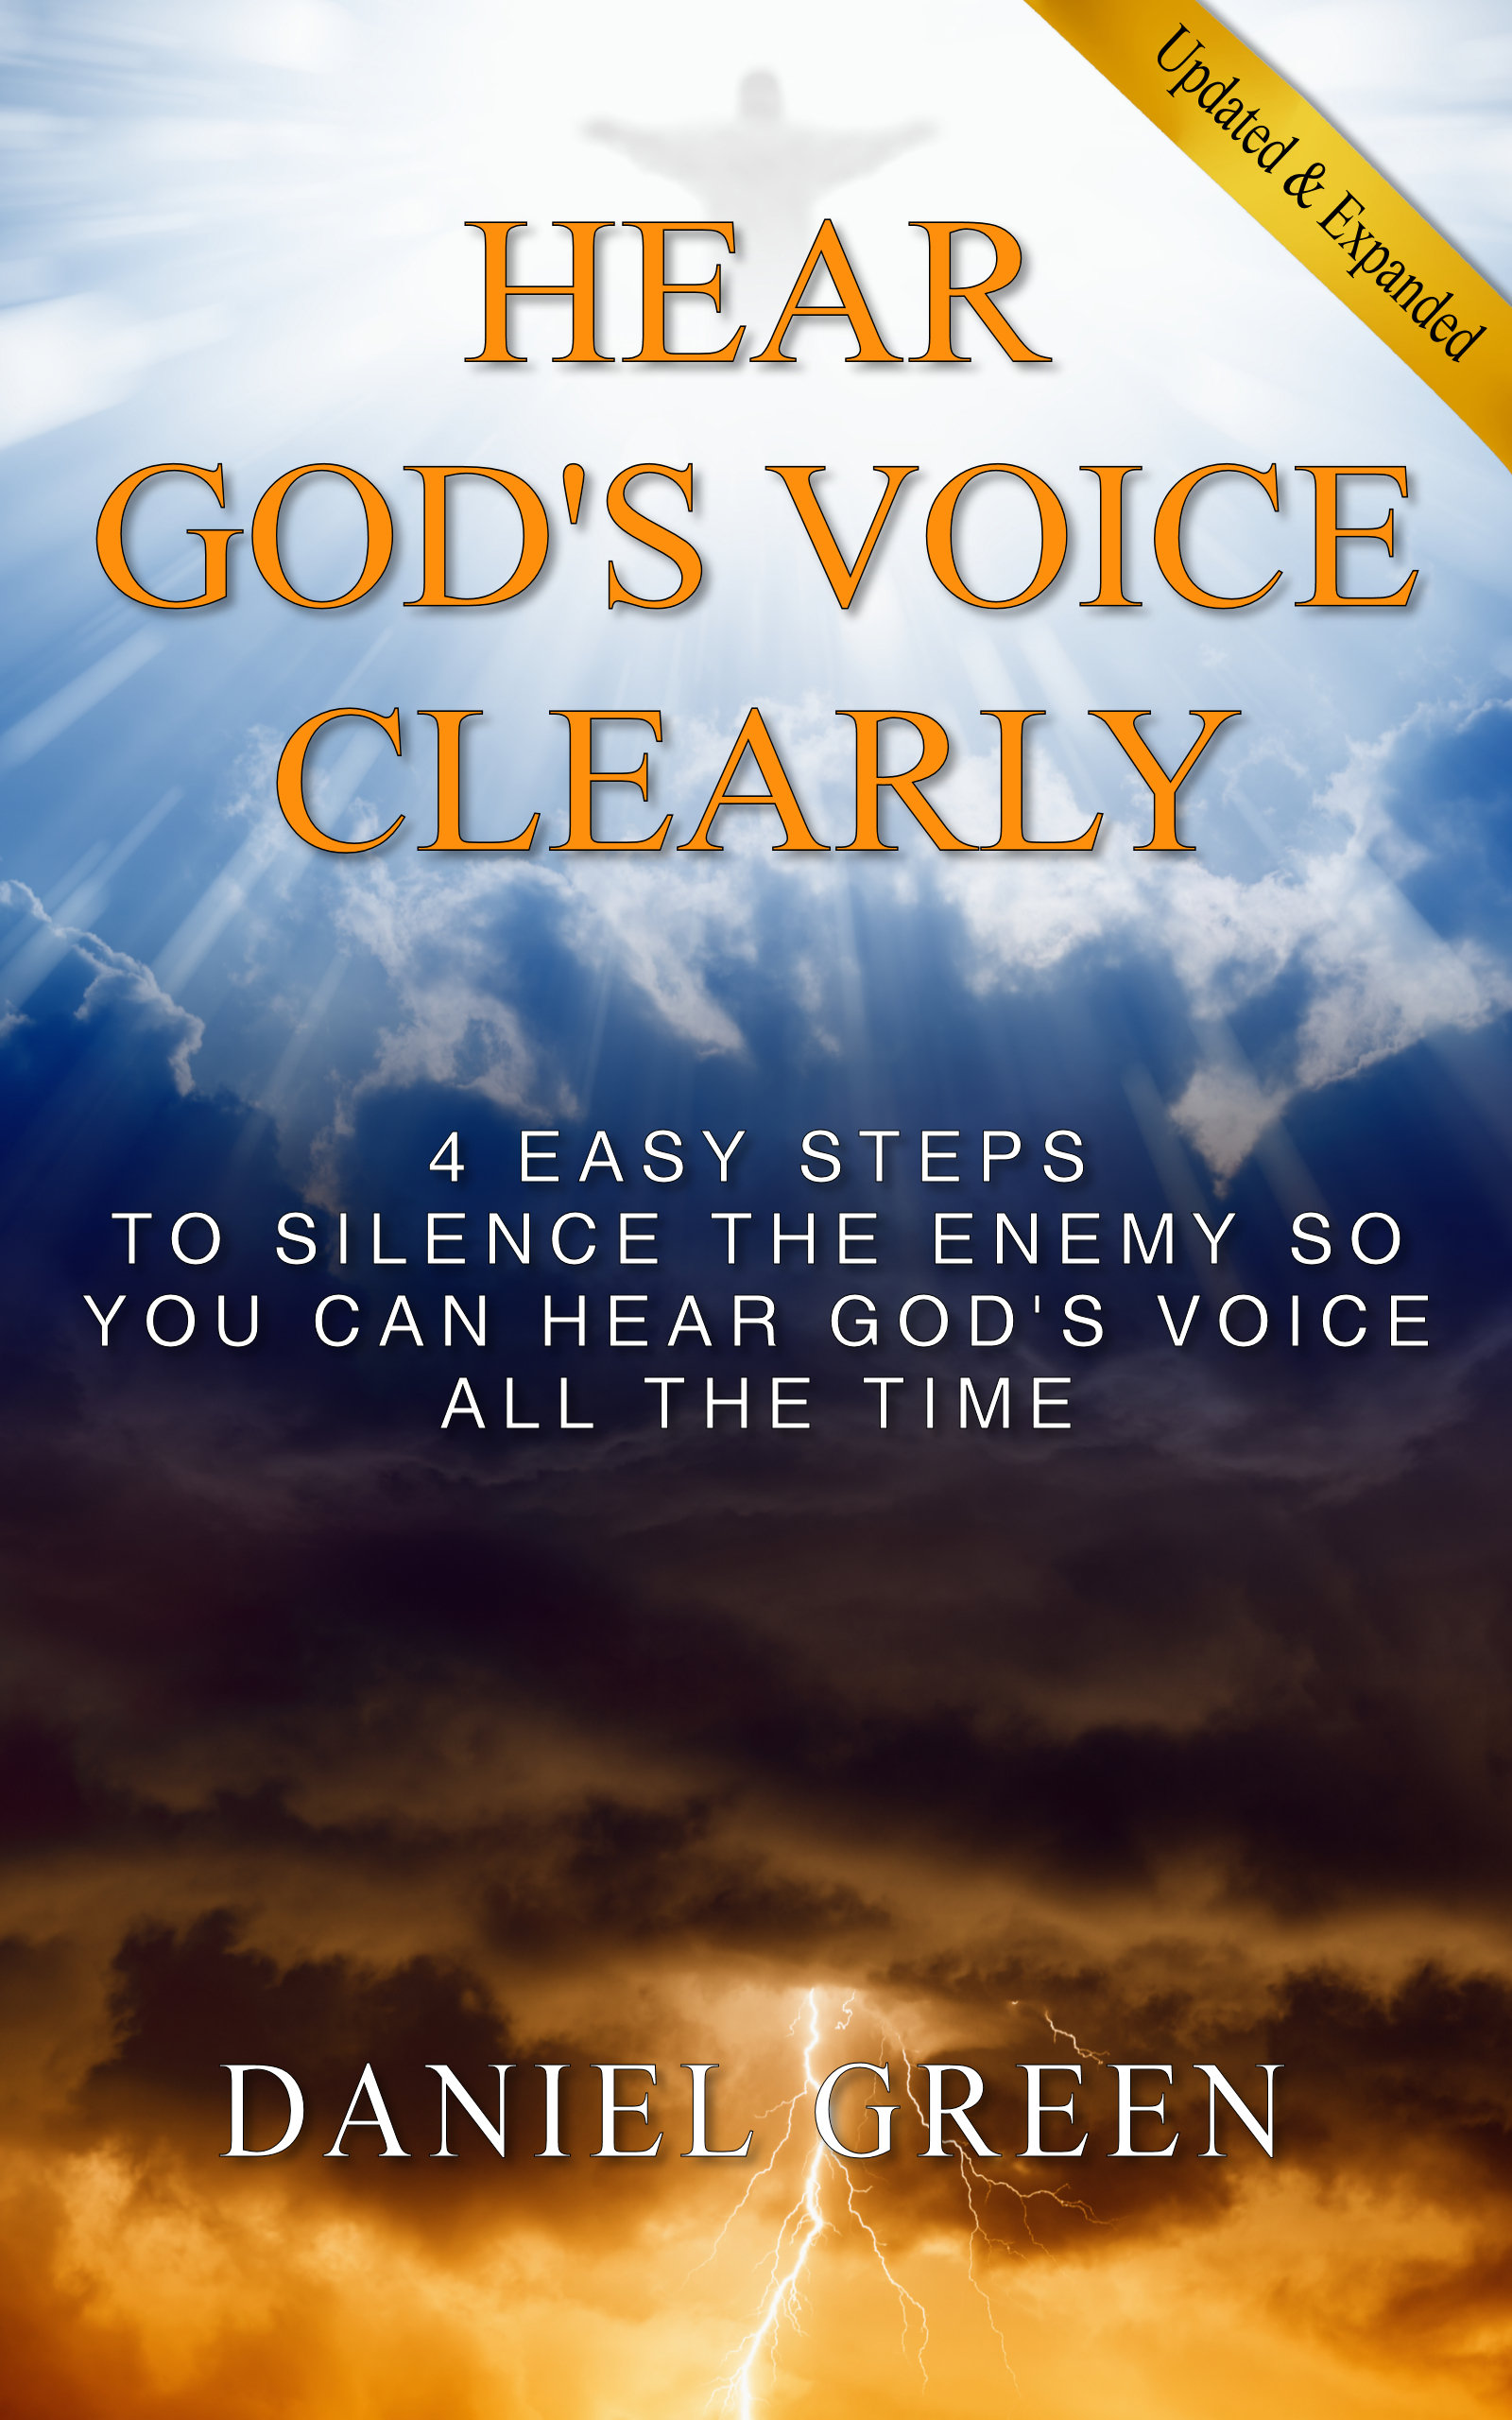 FREE: Hear God’s Voice Clearly: 4 Easy Steps to Silence the Enemy So You Can Hear God’s Voice All the Time by Daniel Green